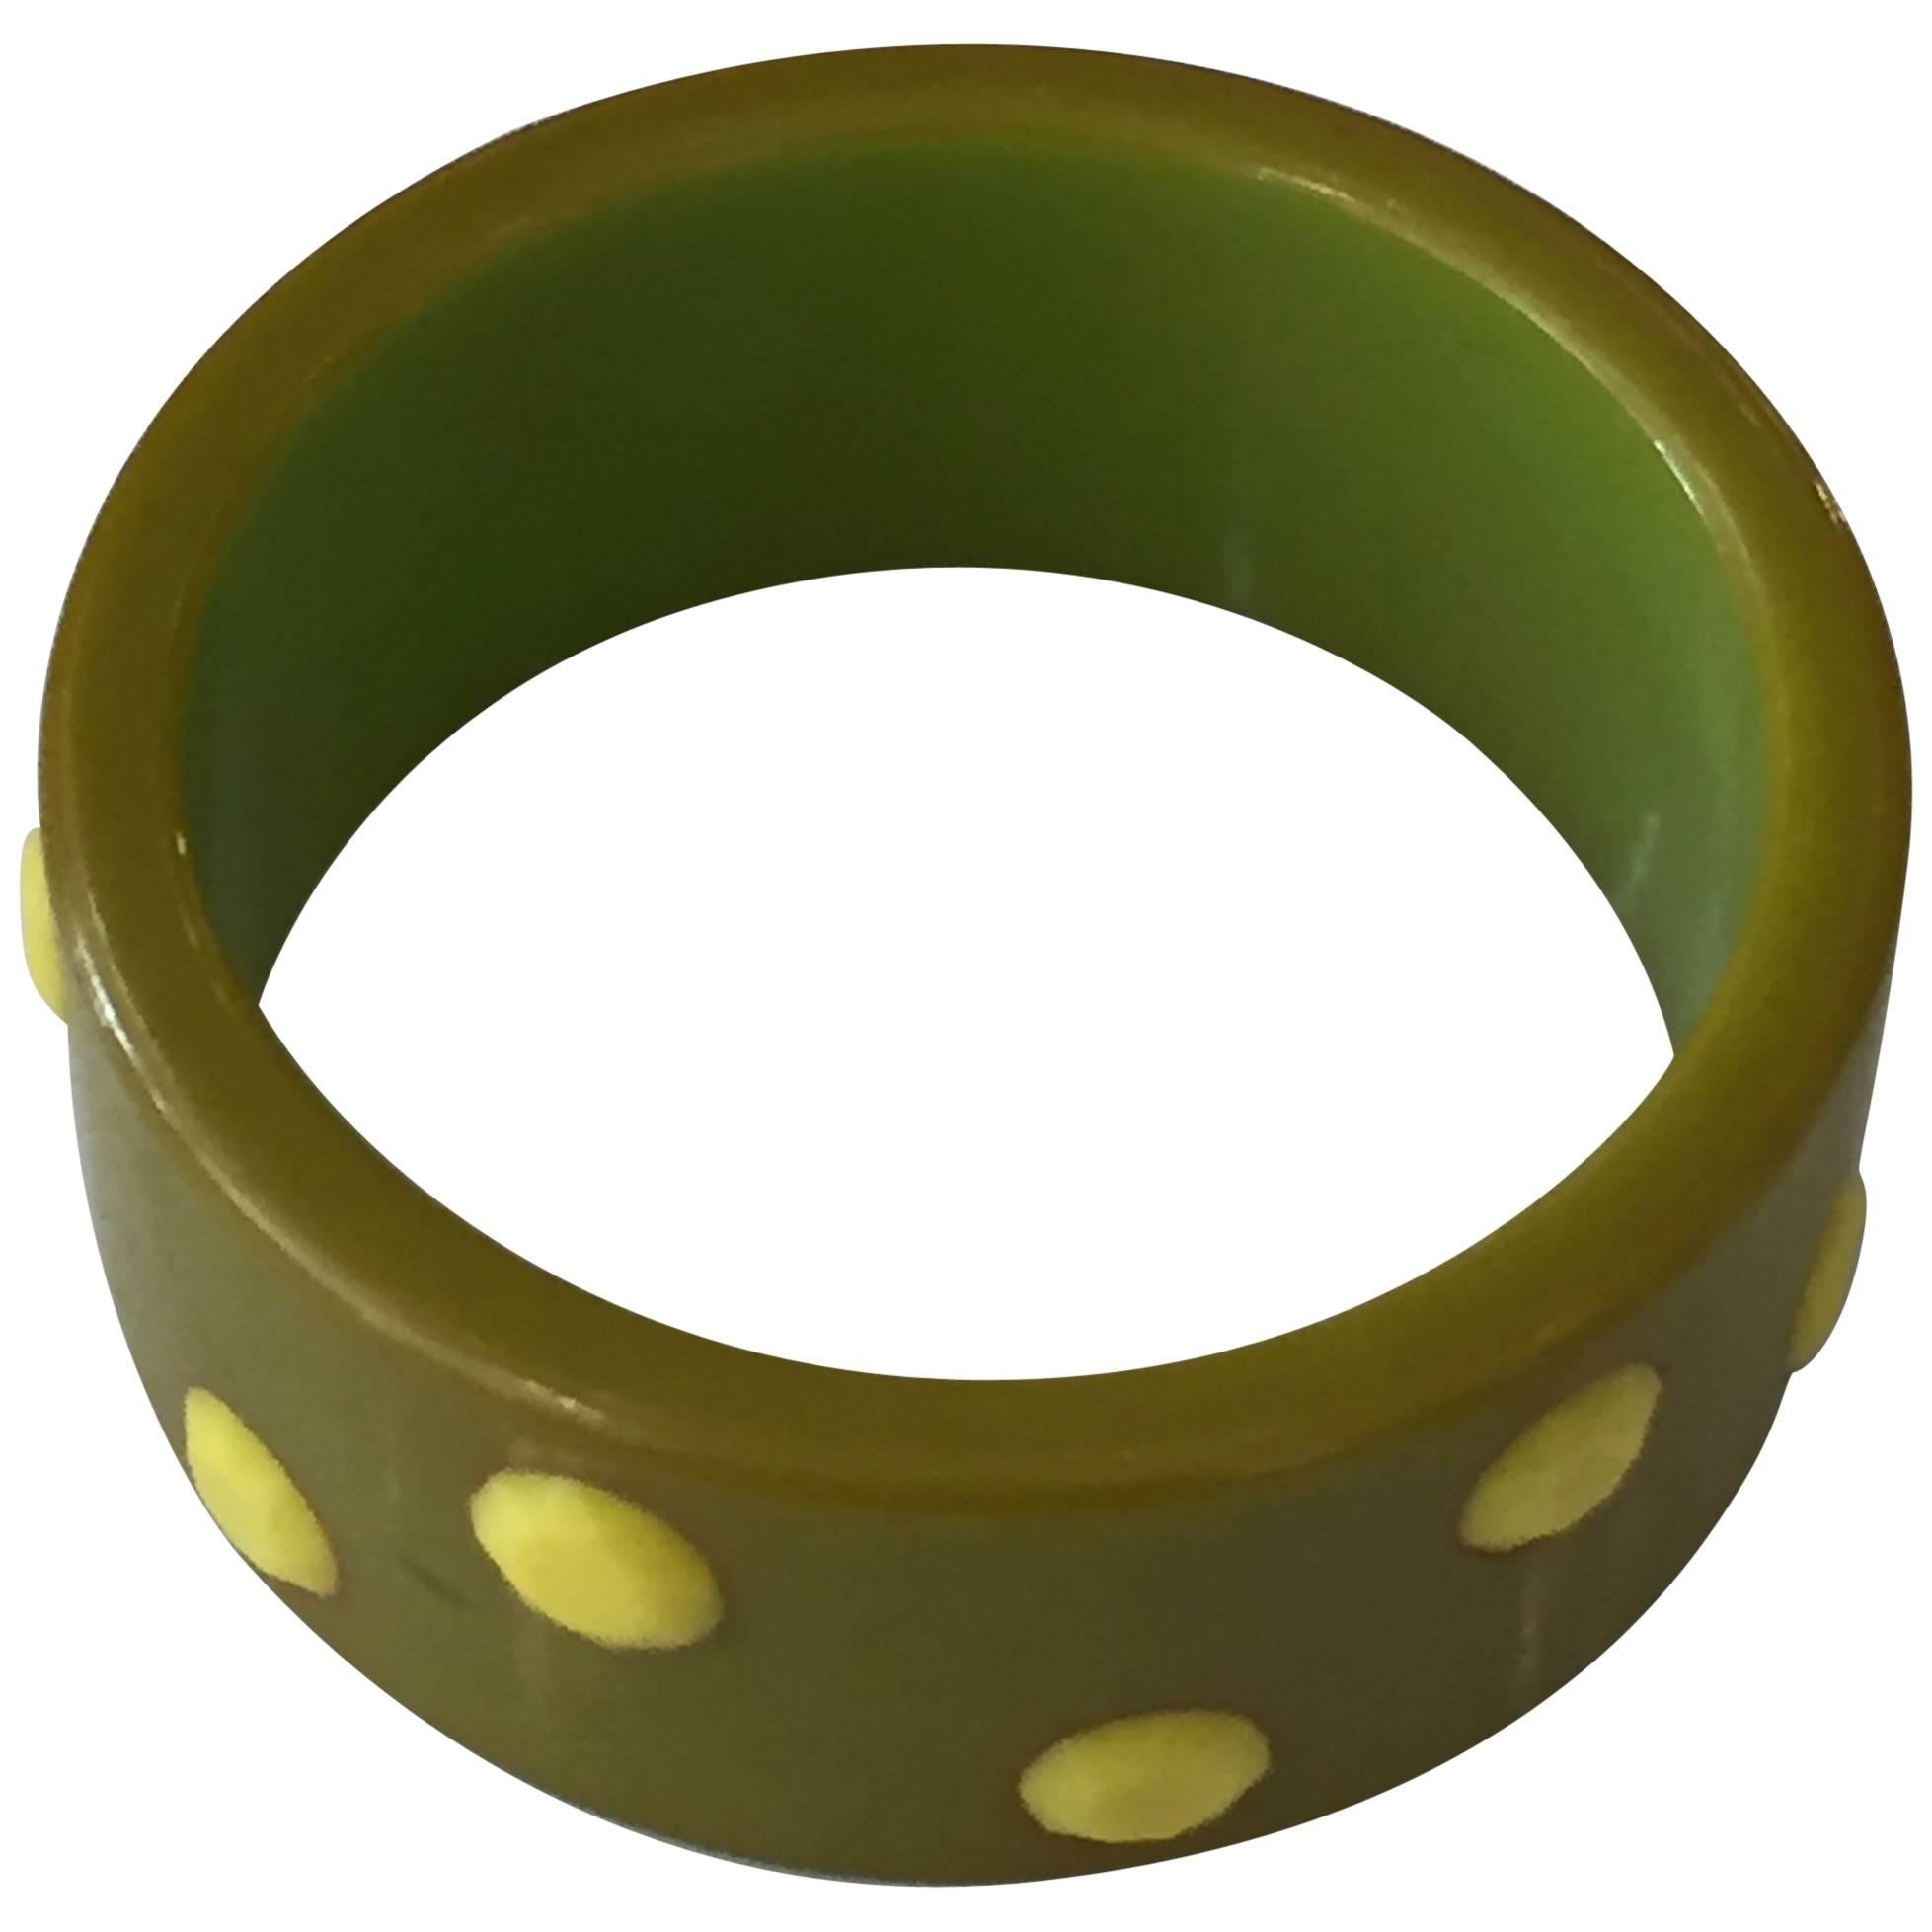 Green and Yellow Polka Dot Celluloid Bakelite Bangle or Cuff Bracelet